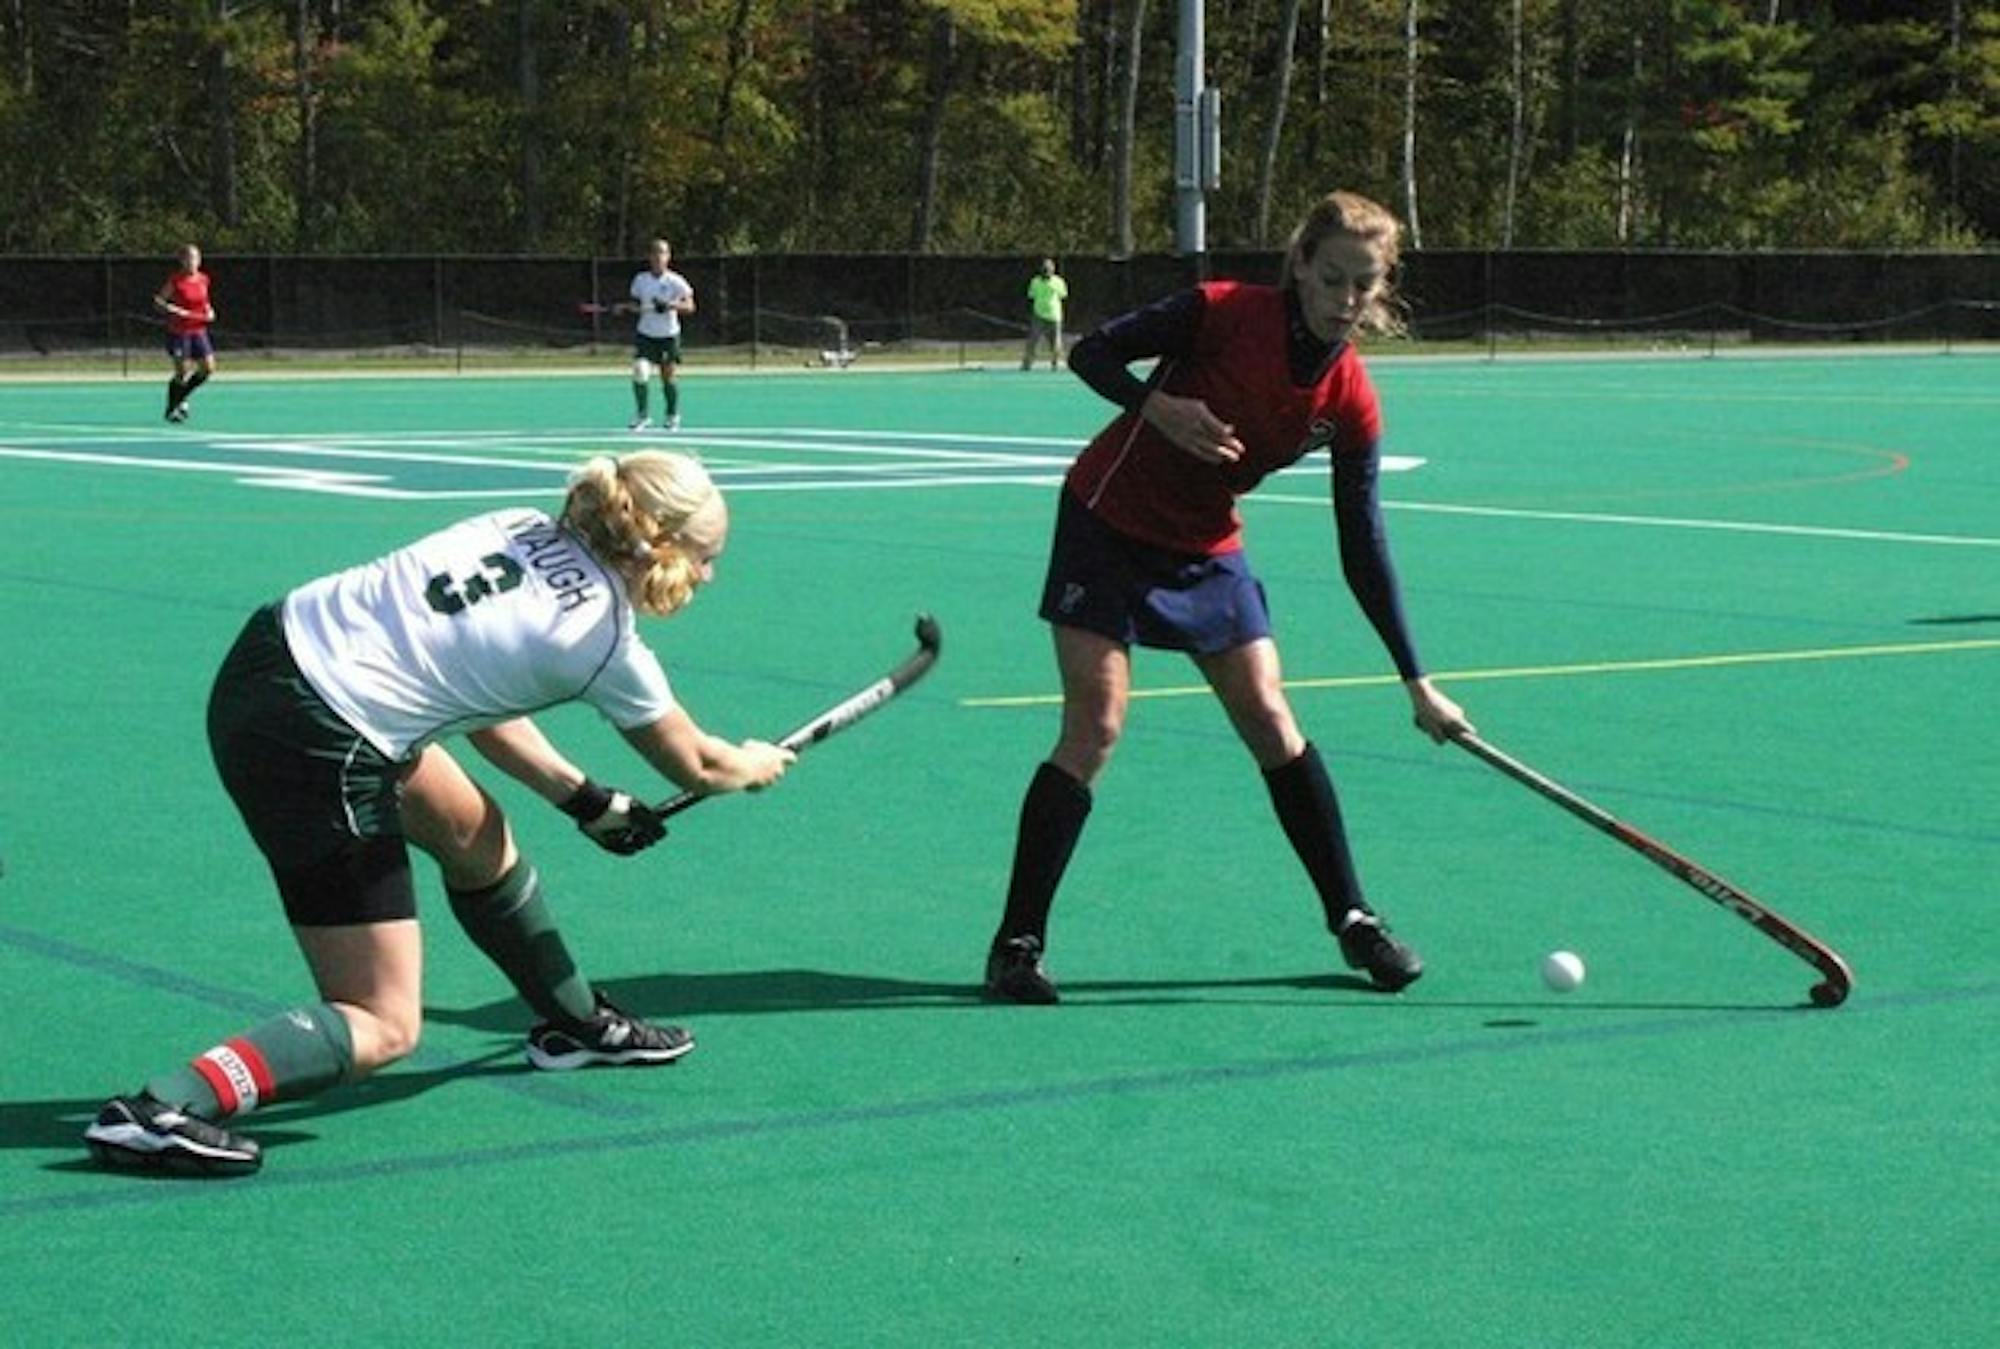 Dartmouth collected its first Ivy League victory by defeating Ivy rival Penn.